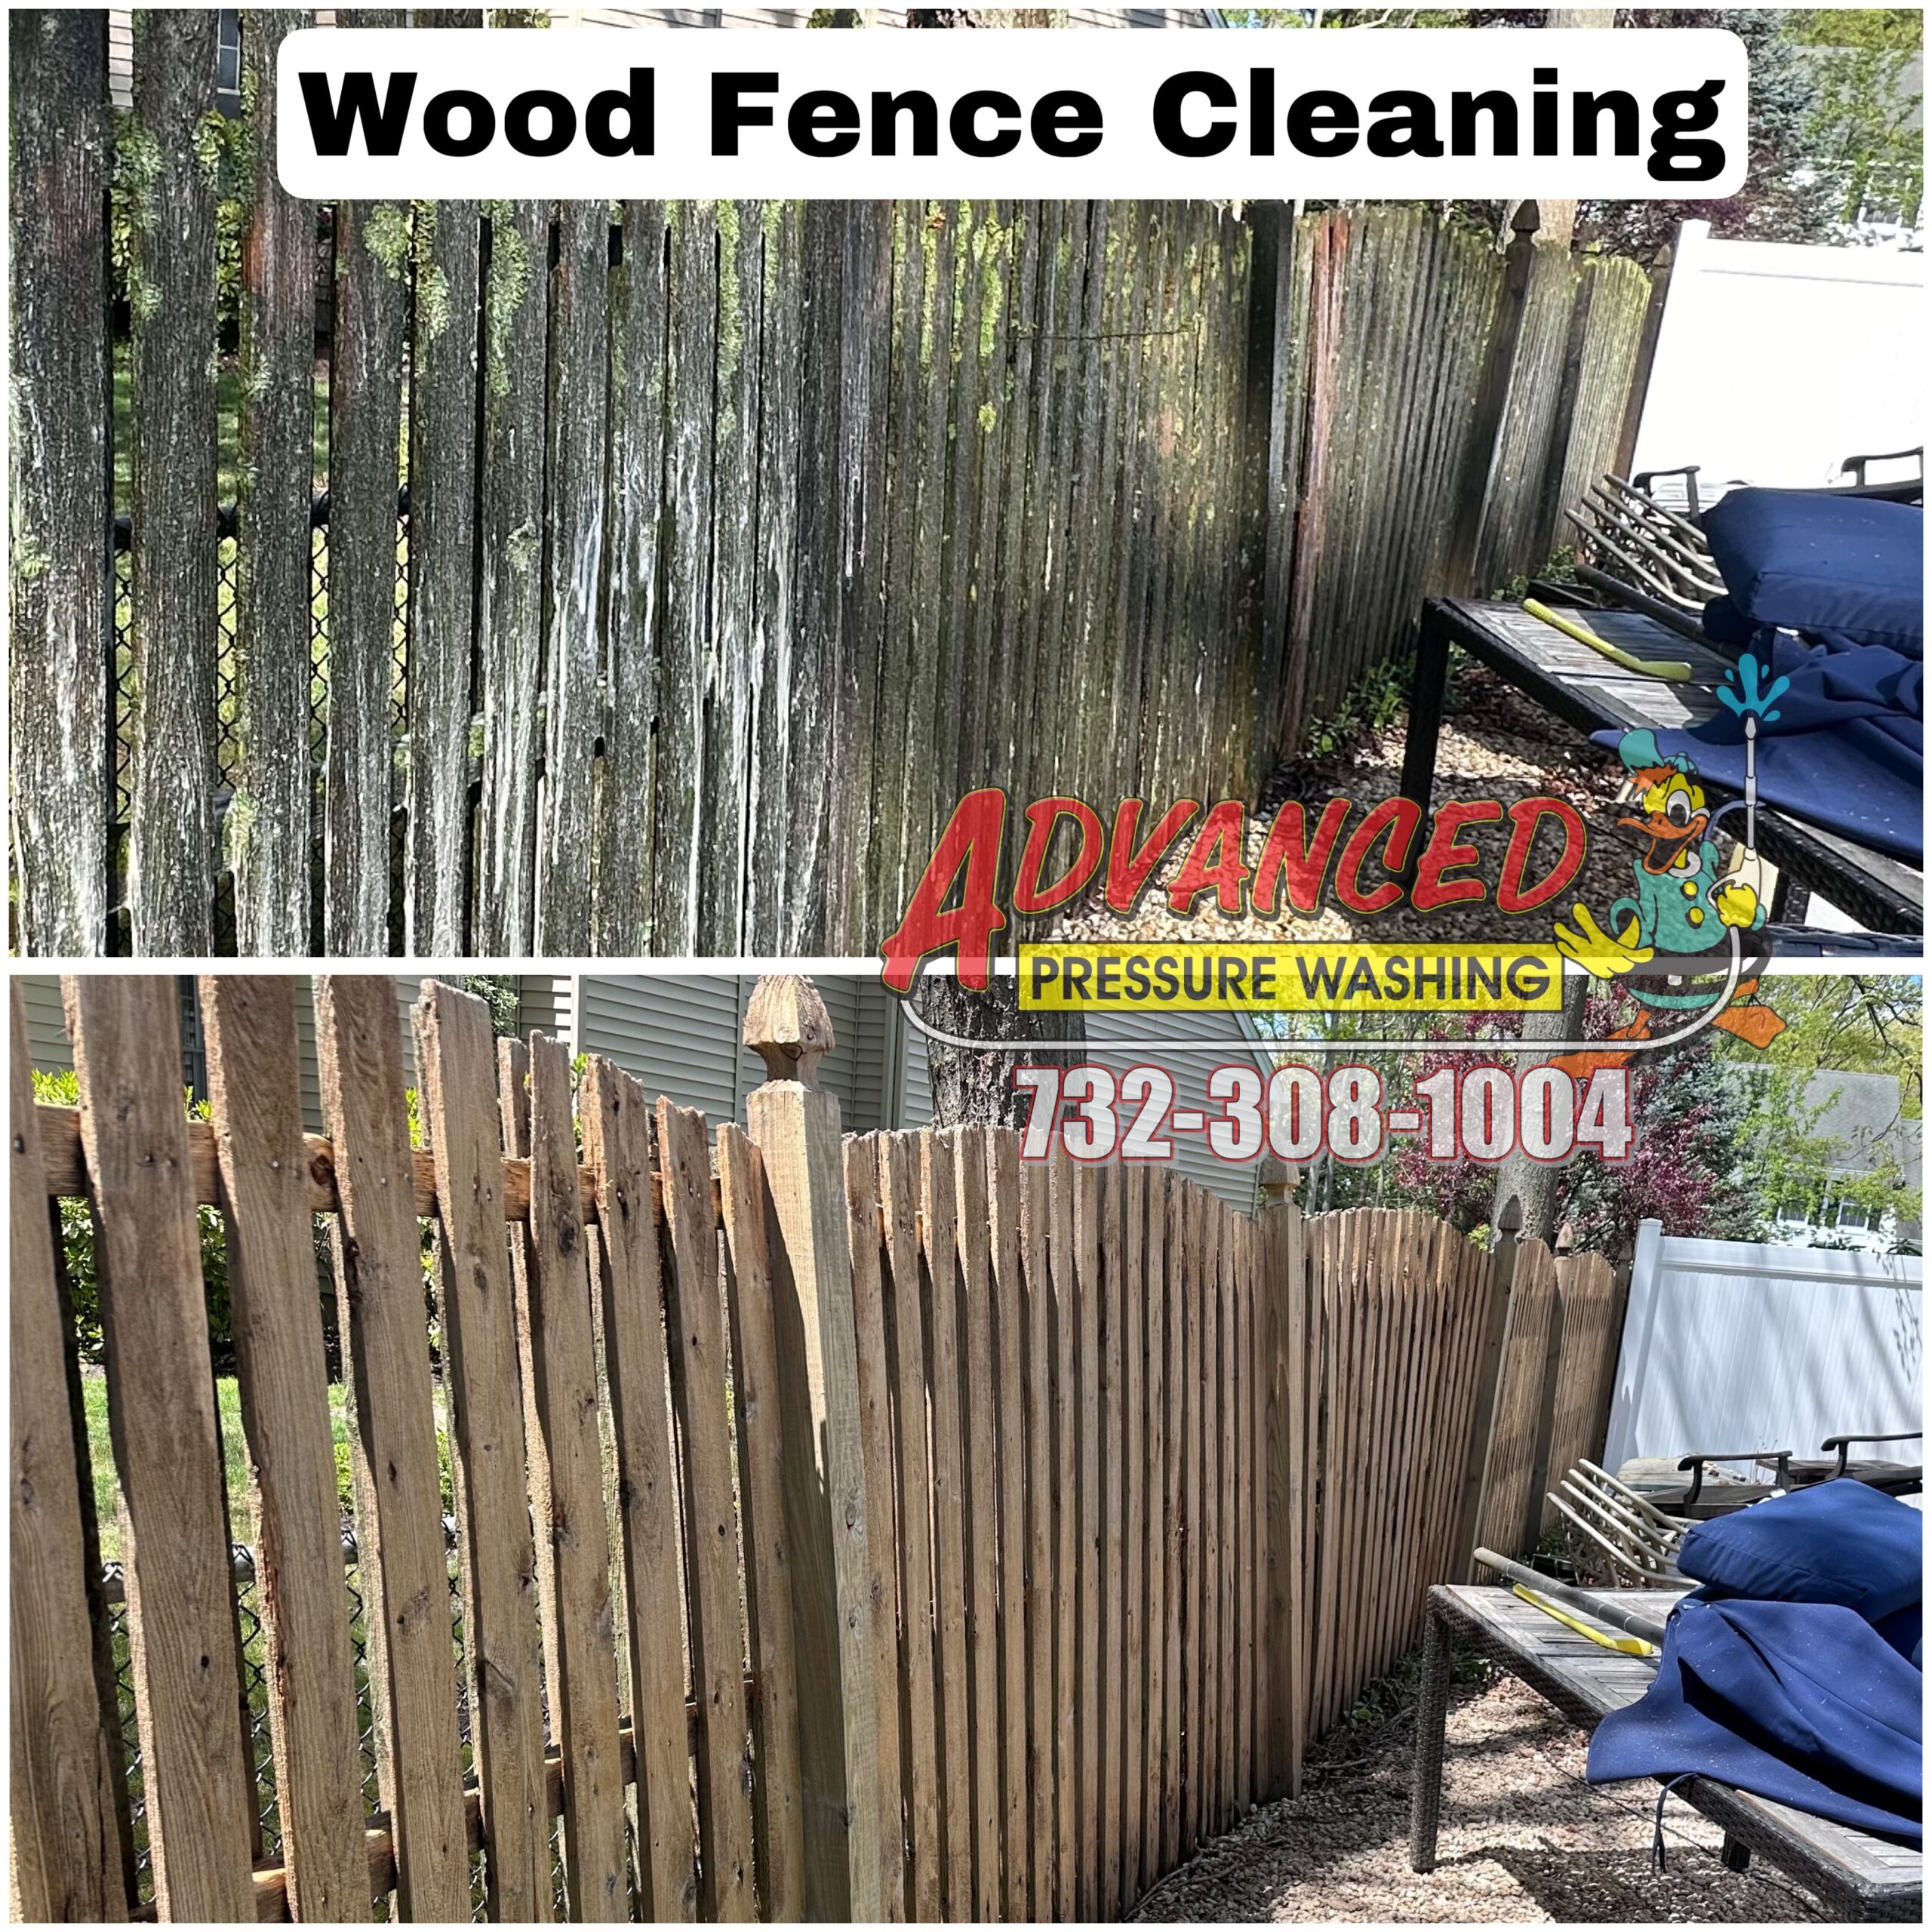 Wood Fence Cleaning (1)